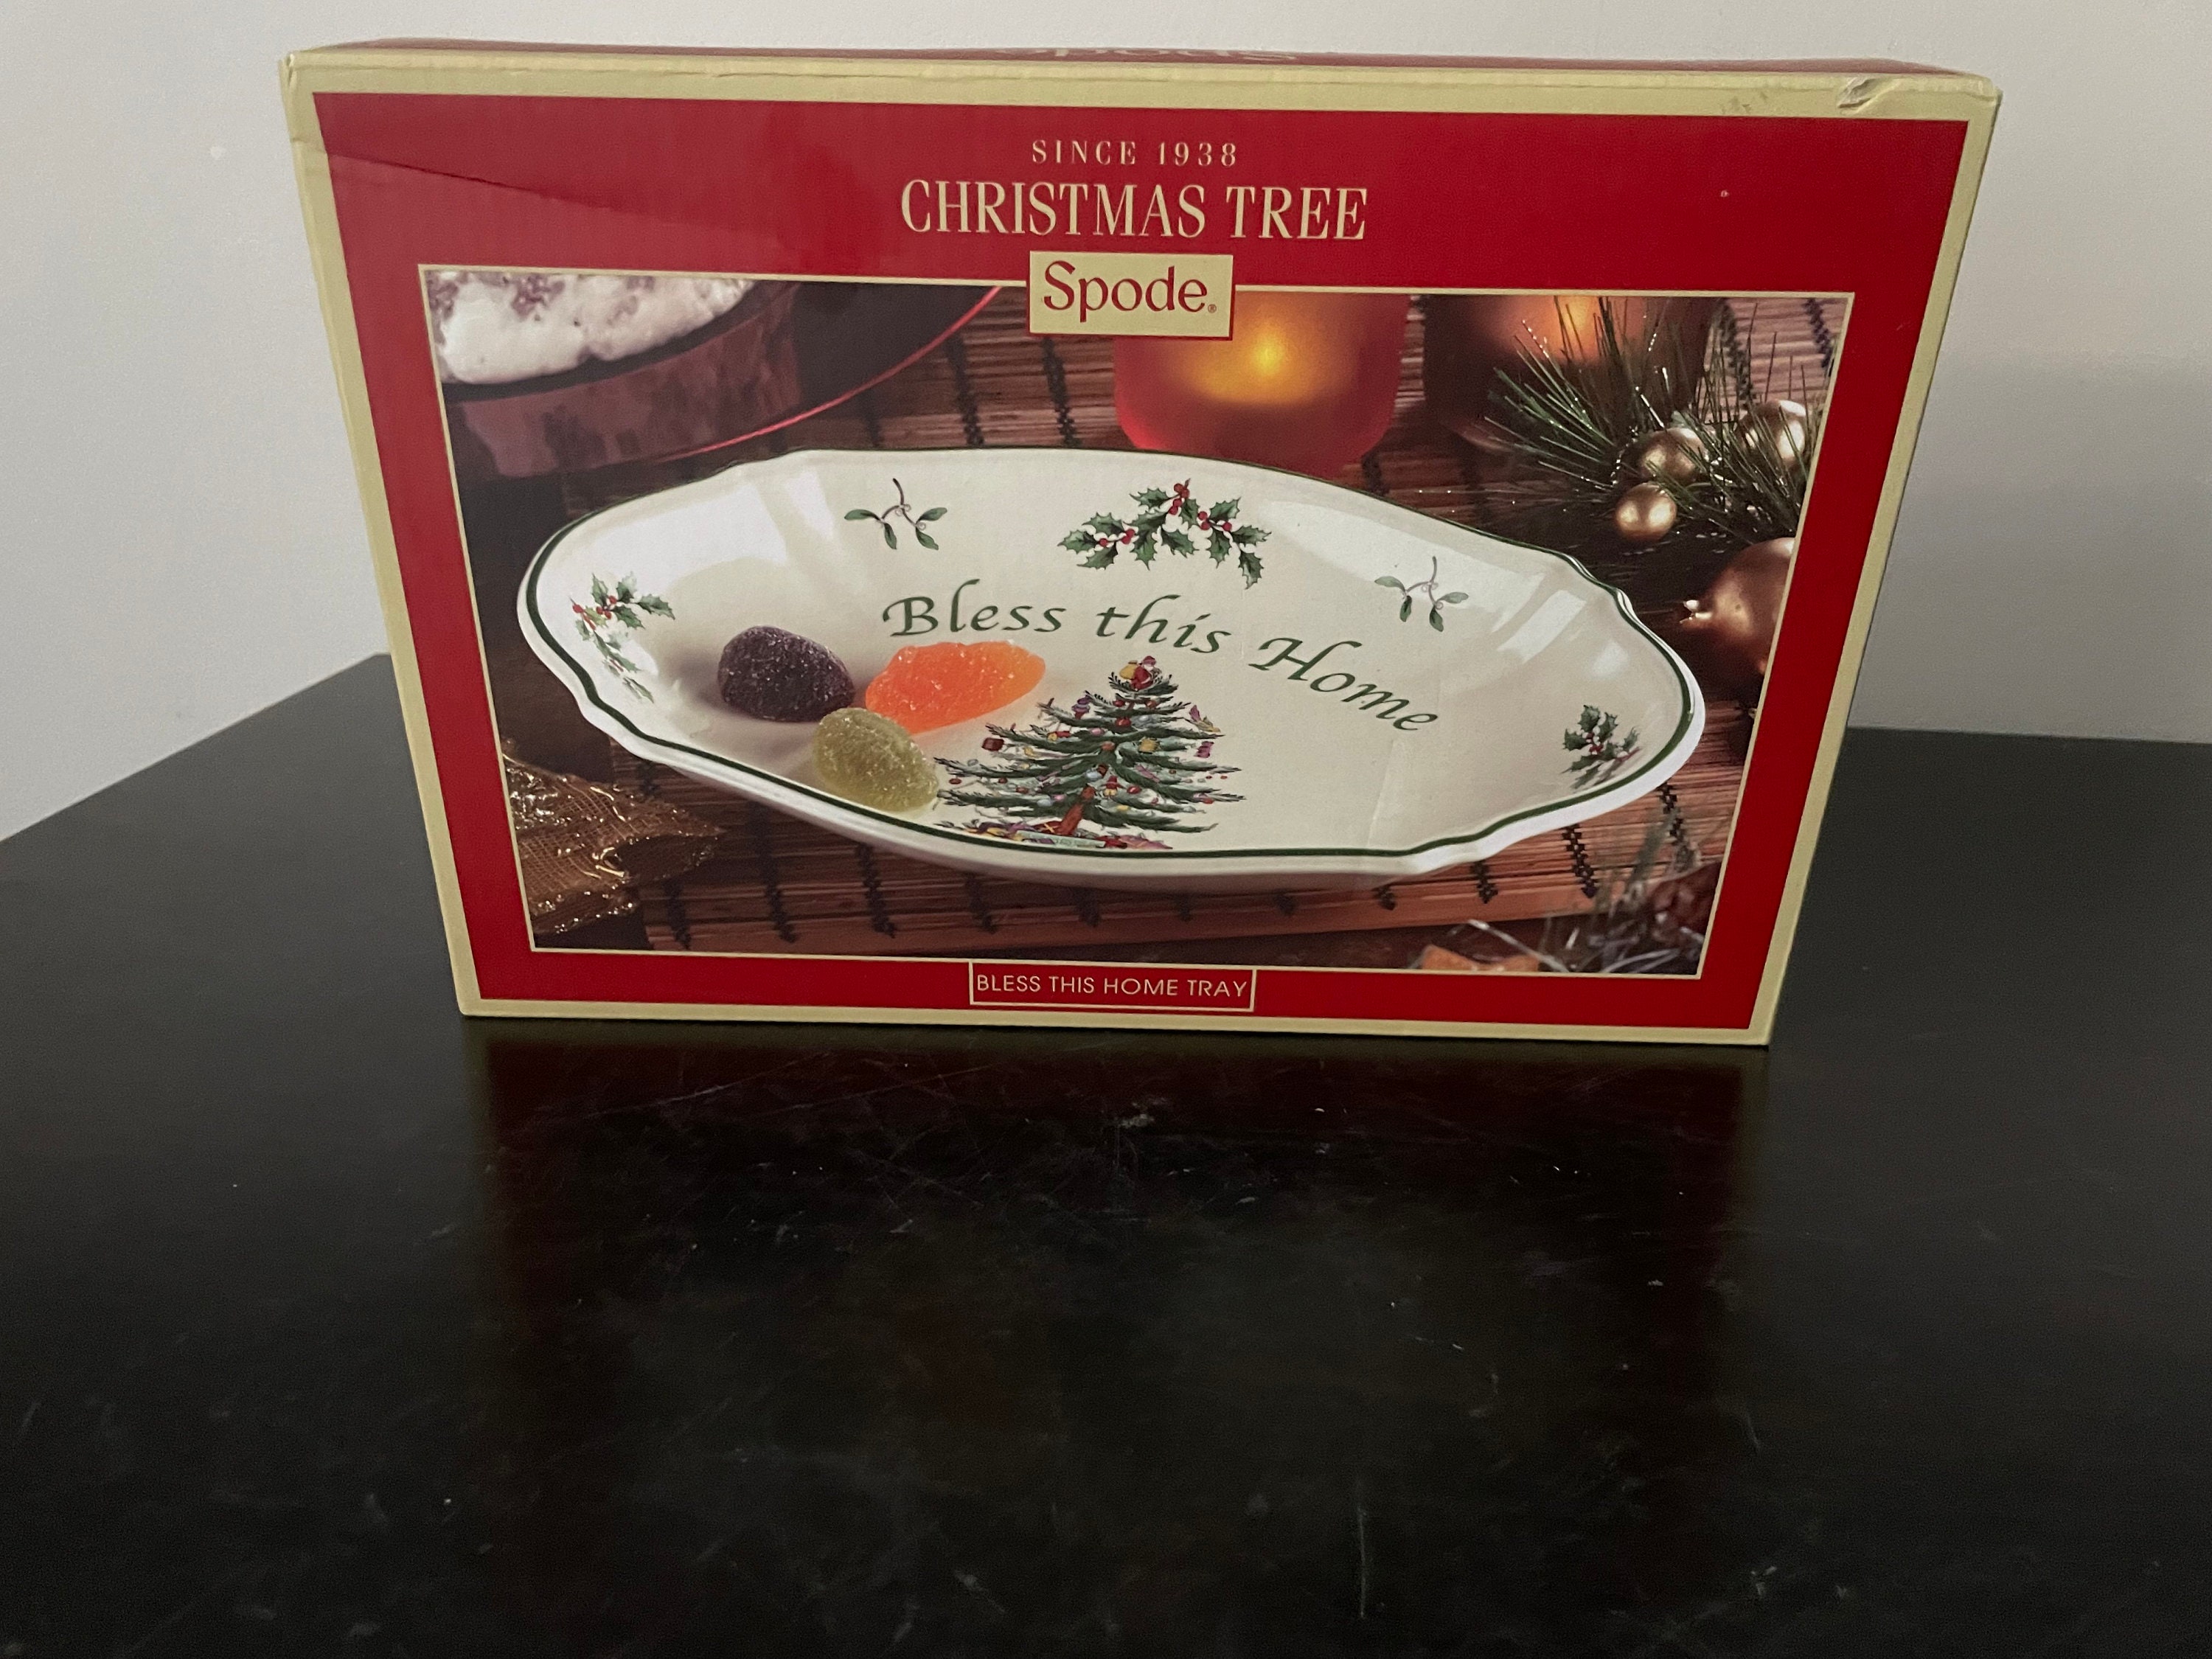 Spode Christmas Tree Loaf Pan, 11.75-inch Baking Dish For Bread